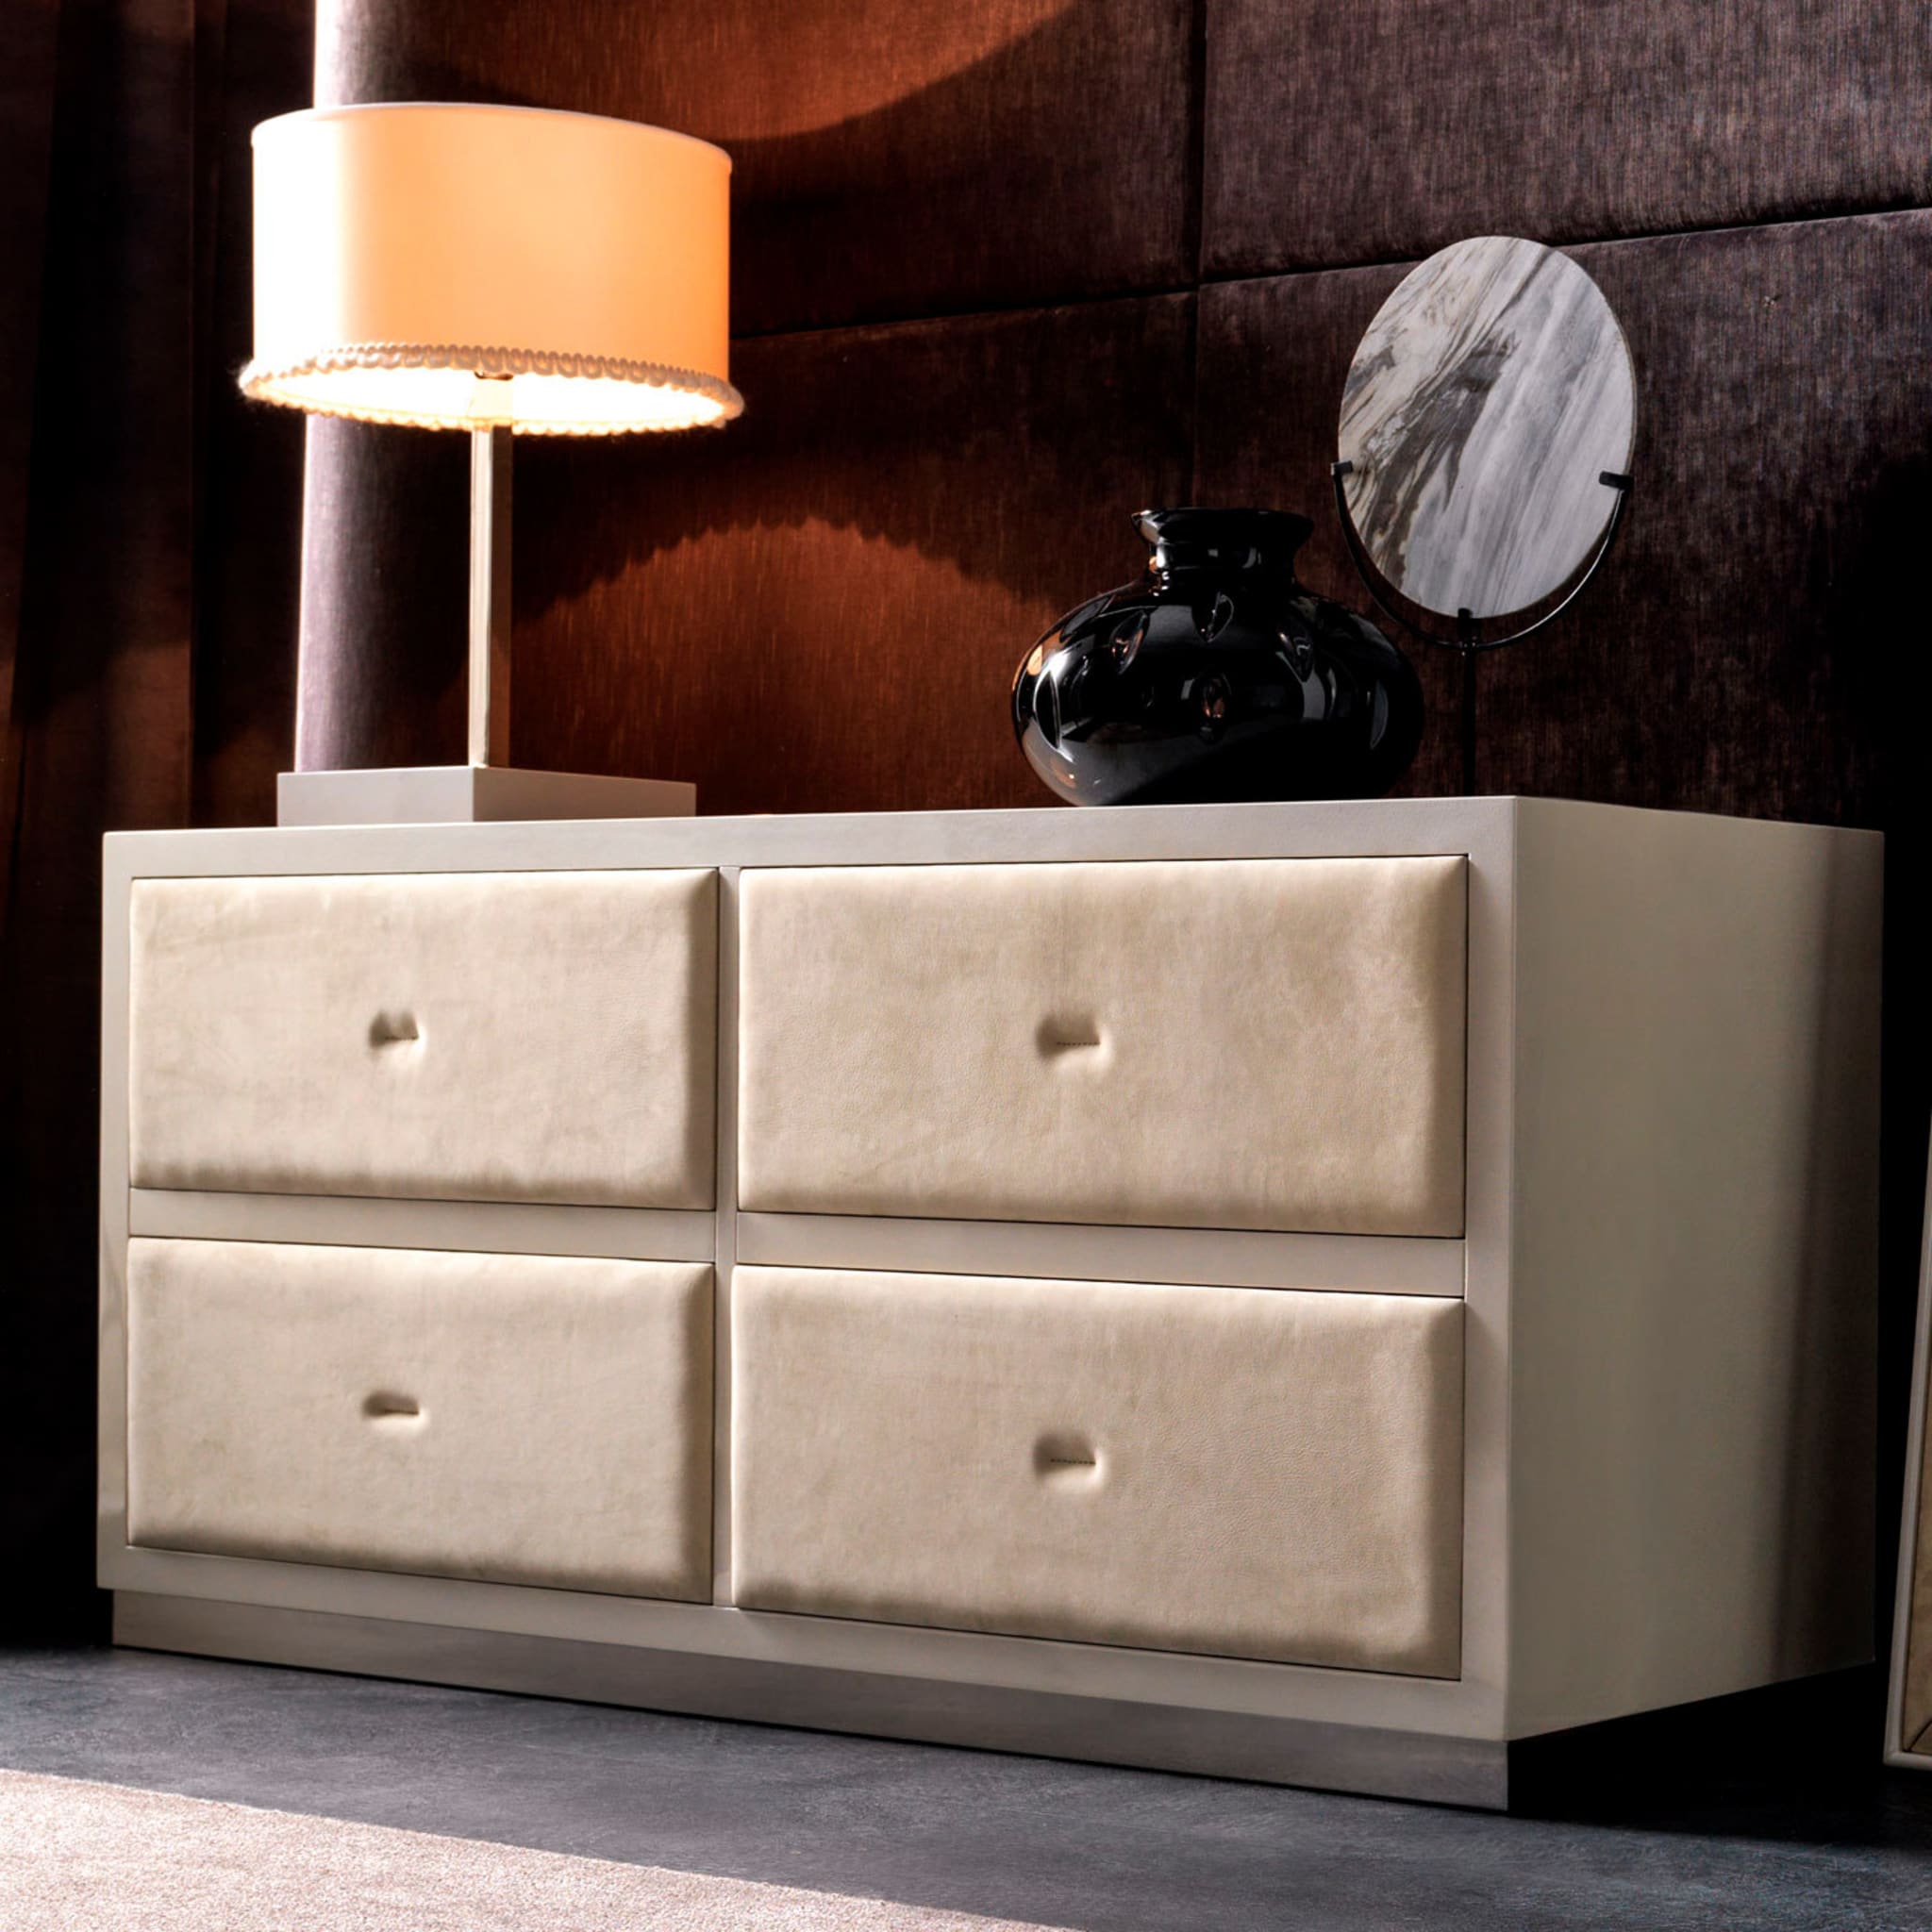 Keope Soft Beige Chest of Drawers - Alternative view 1